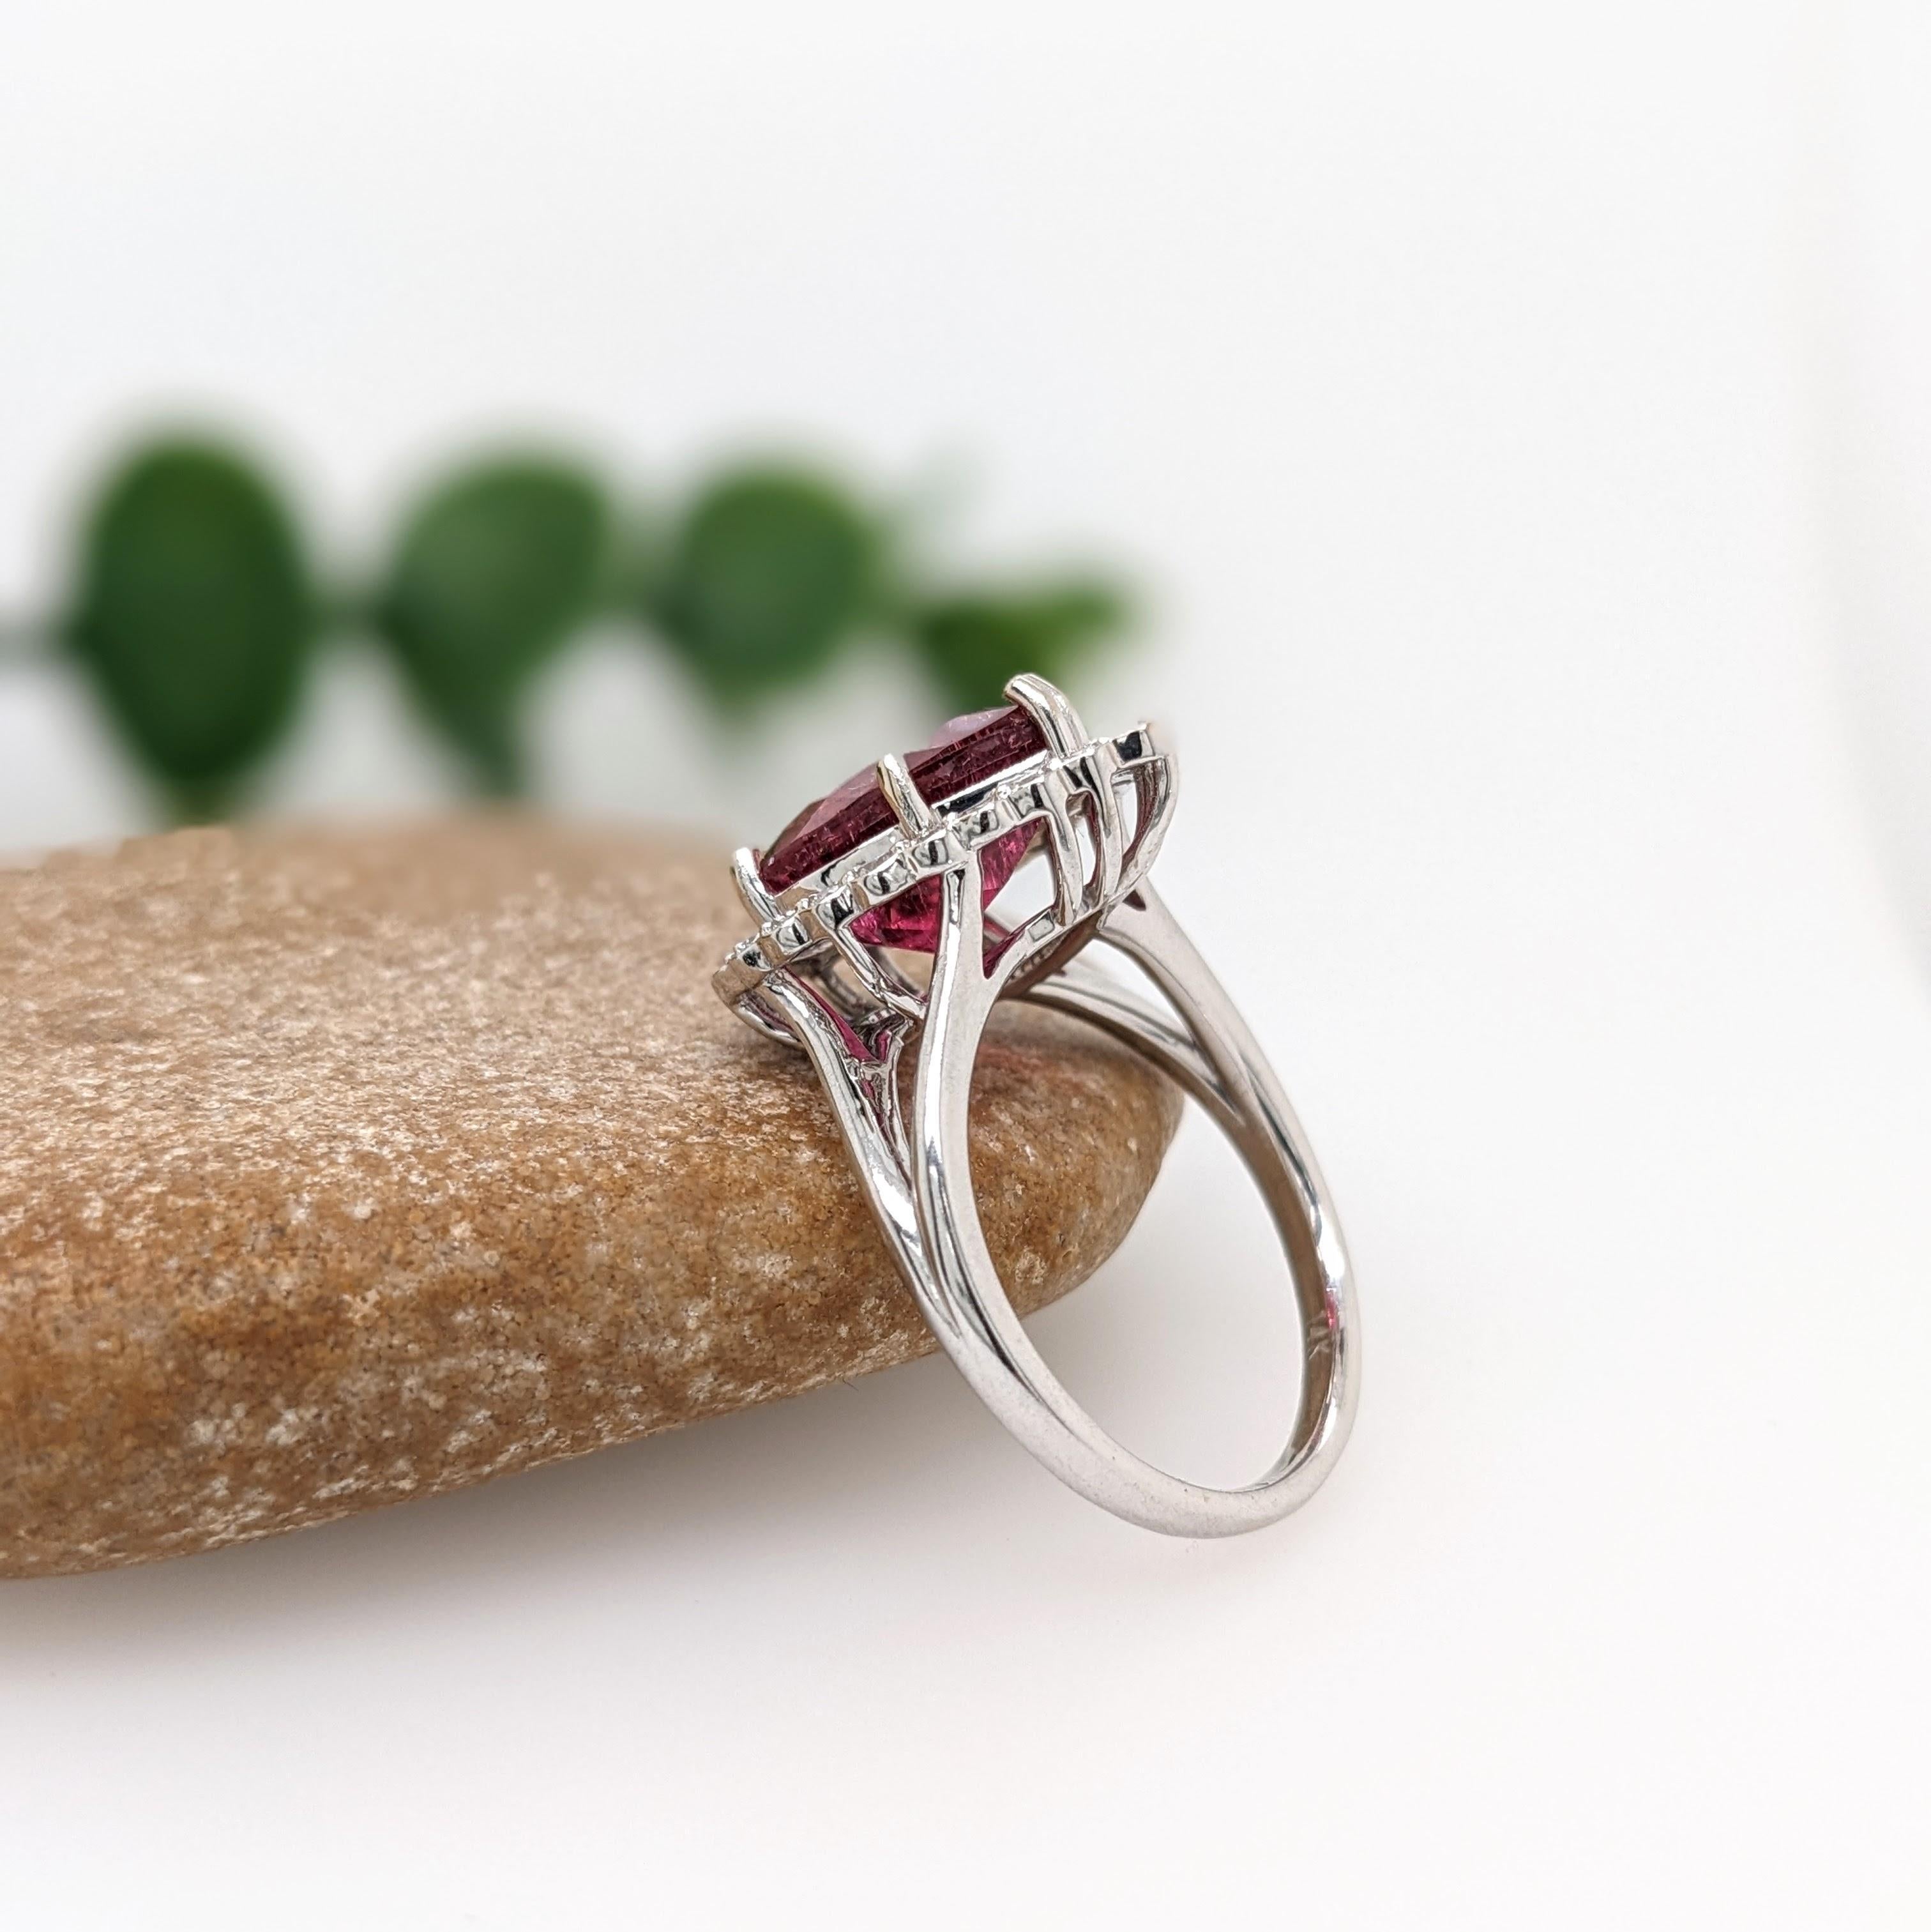 3.4ct Rubellite Tourmaline Ring w Earth Mined Diamonds in Solid 14K Gold PR 11x9 For Sale 1